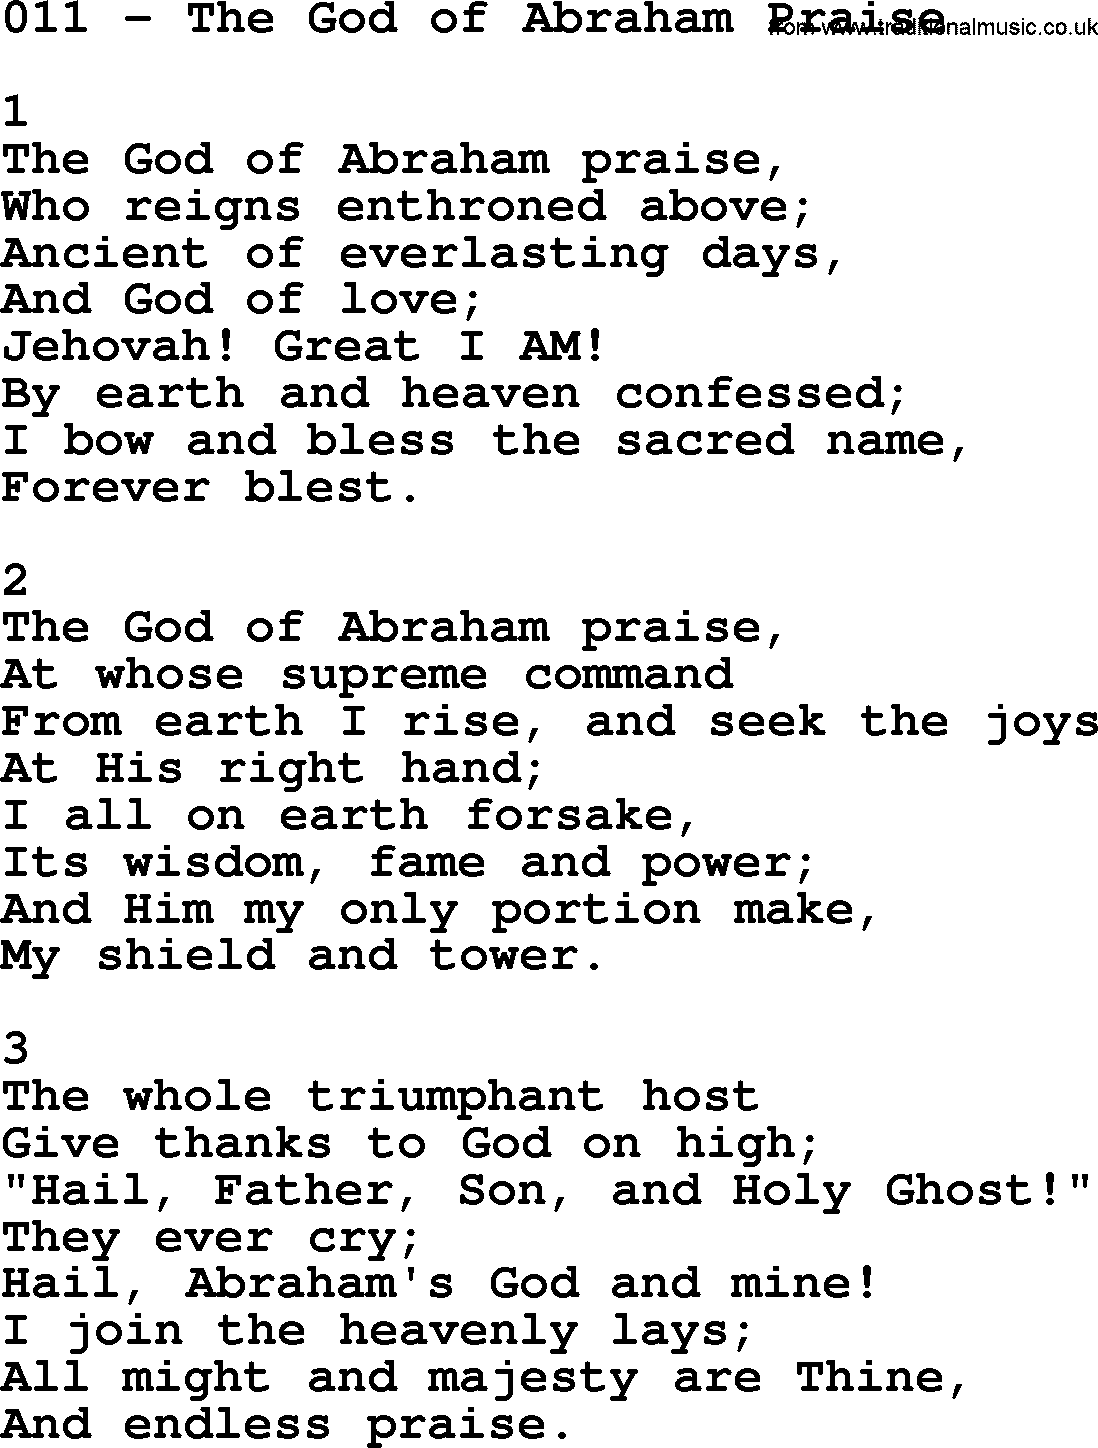 Complete Adventis Hymnal, title: 011-The God Of Abraham Praise, with lyrics, midi, mp3, powerpoints(PPT) and PDF,